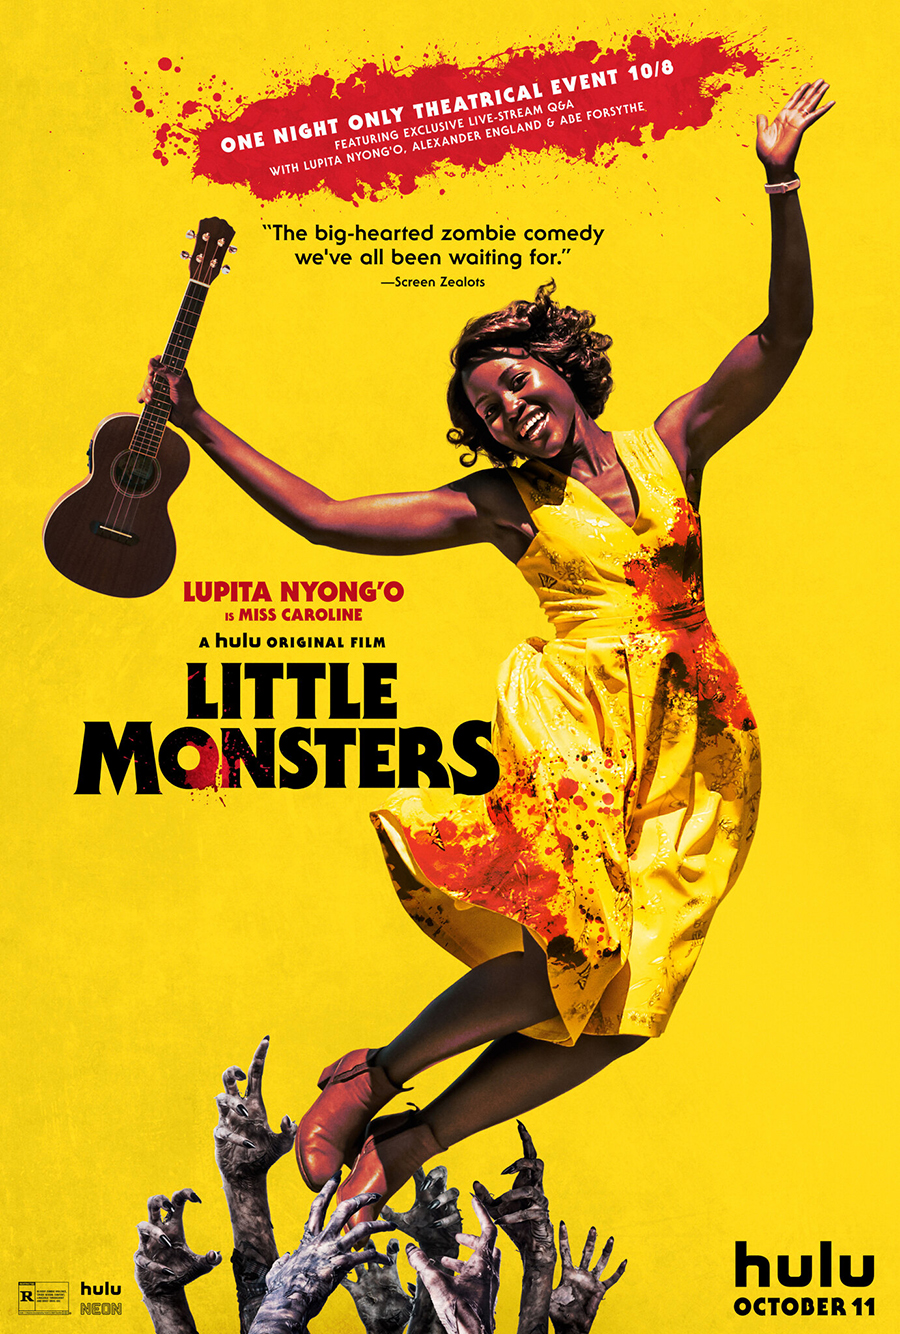 Little Monsters starring Lupita Nyong’o